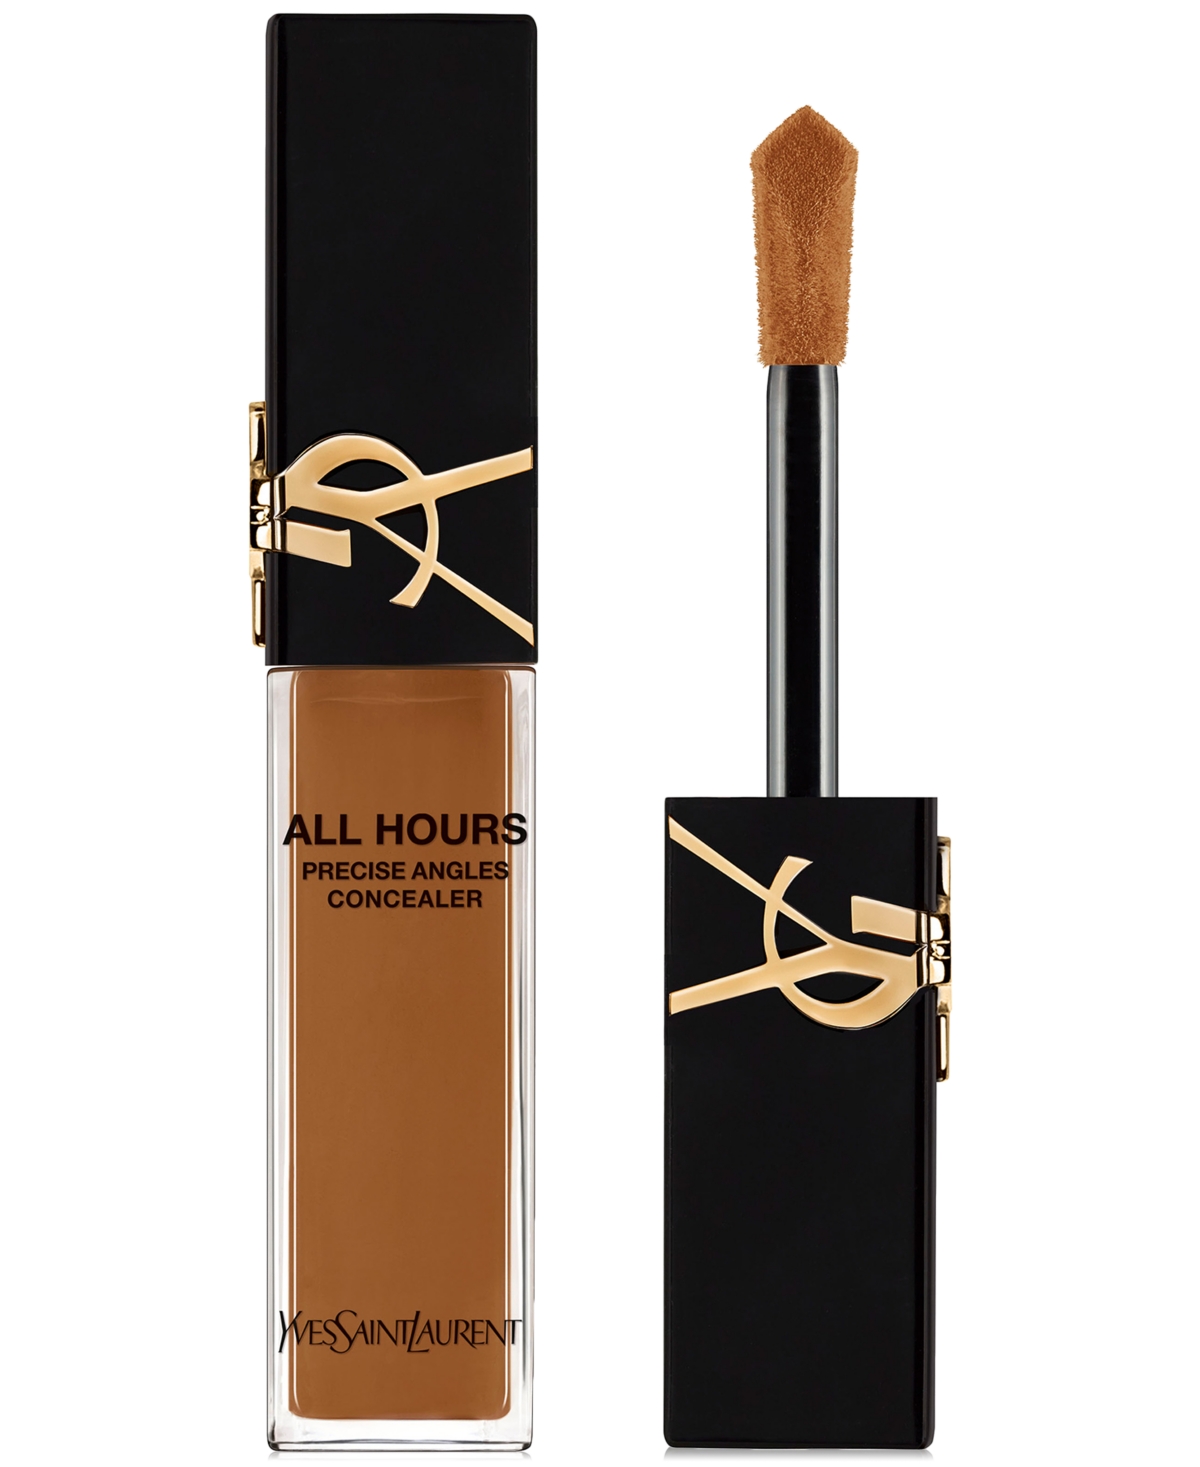 Saint Laurent All Hours Precise Angles Full-coverage Concealer In Deep Shade With Neutral Undertones